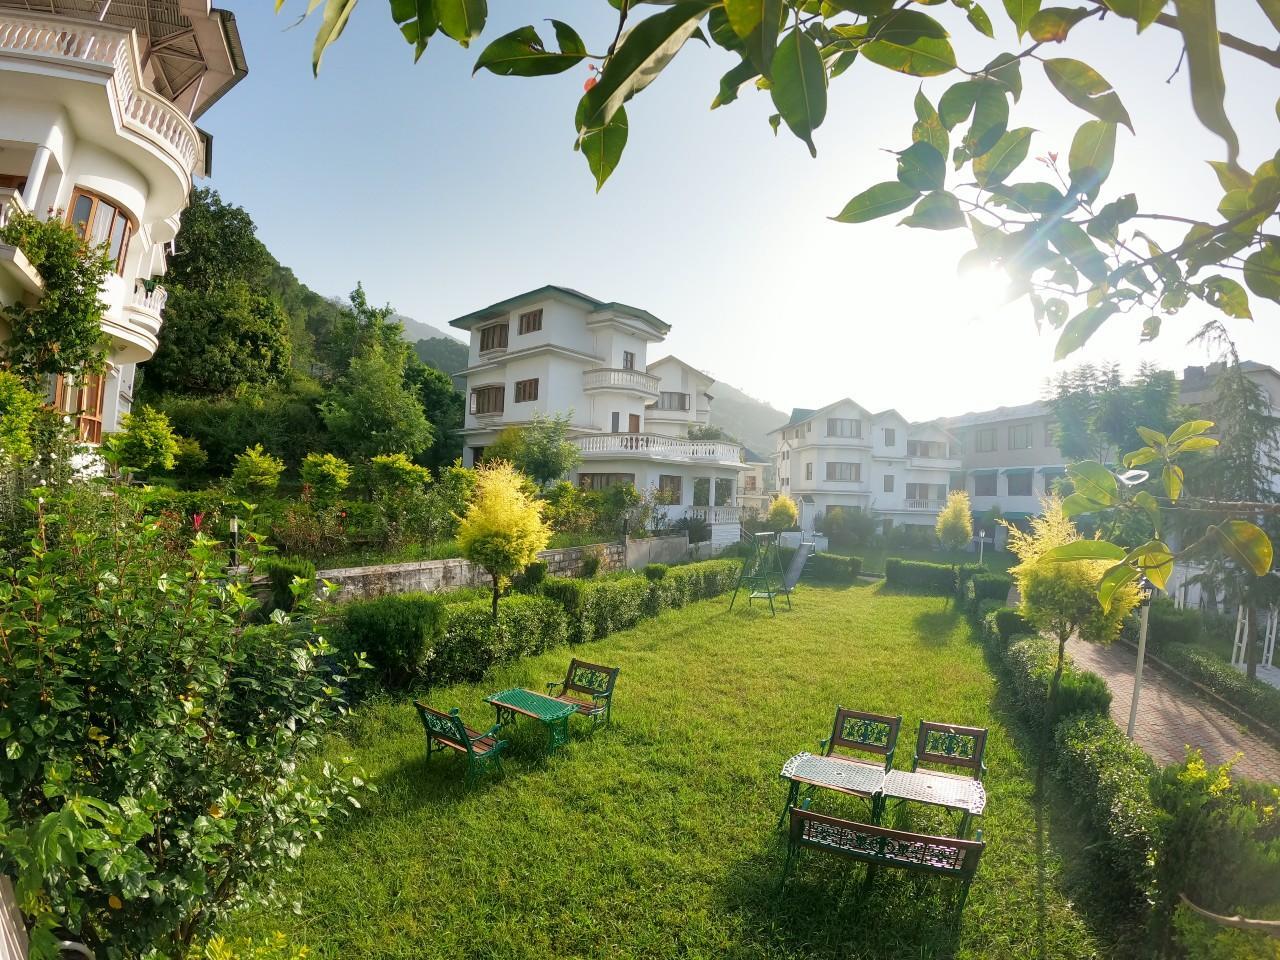 Fresco Hotel And Residences - Palampur